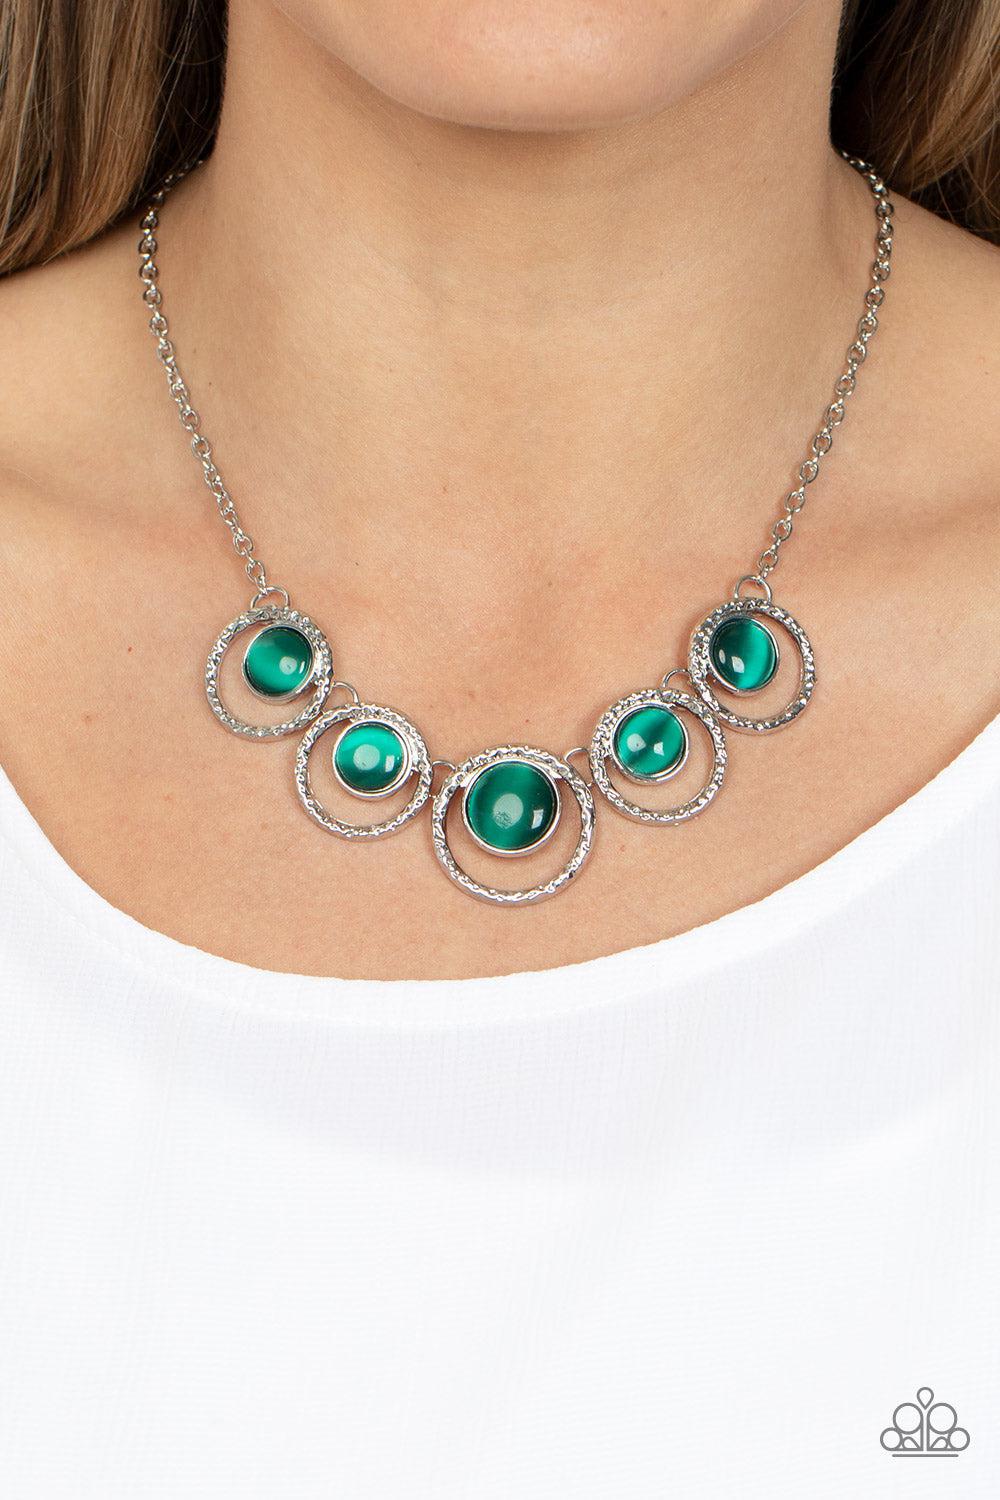 Elliptical Enchantment Green Cat&#39;s Eye Stone Necklace - Paparazzi Accessories-on model - CarasShop.com - $5 Jewelry by Cara Jewels